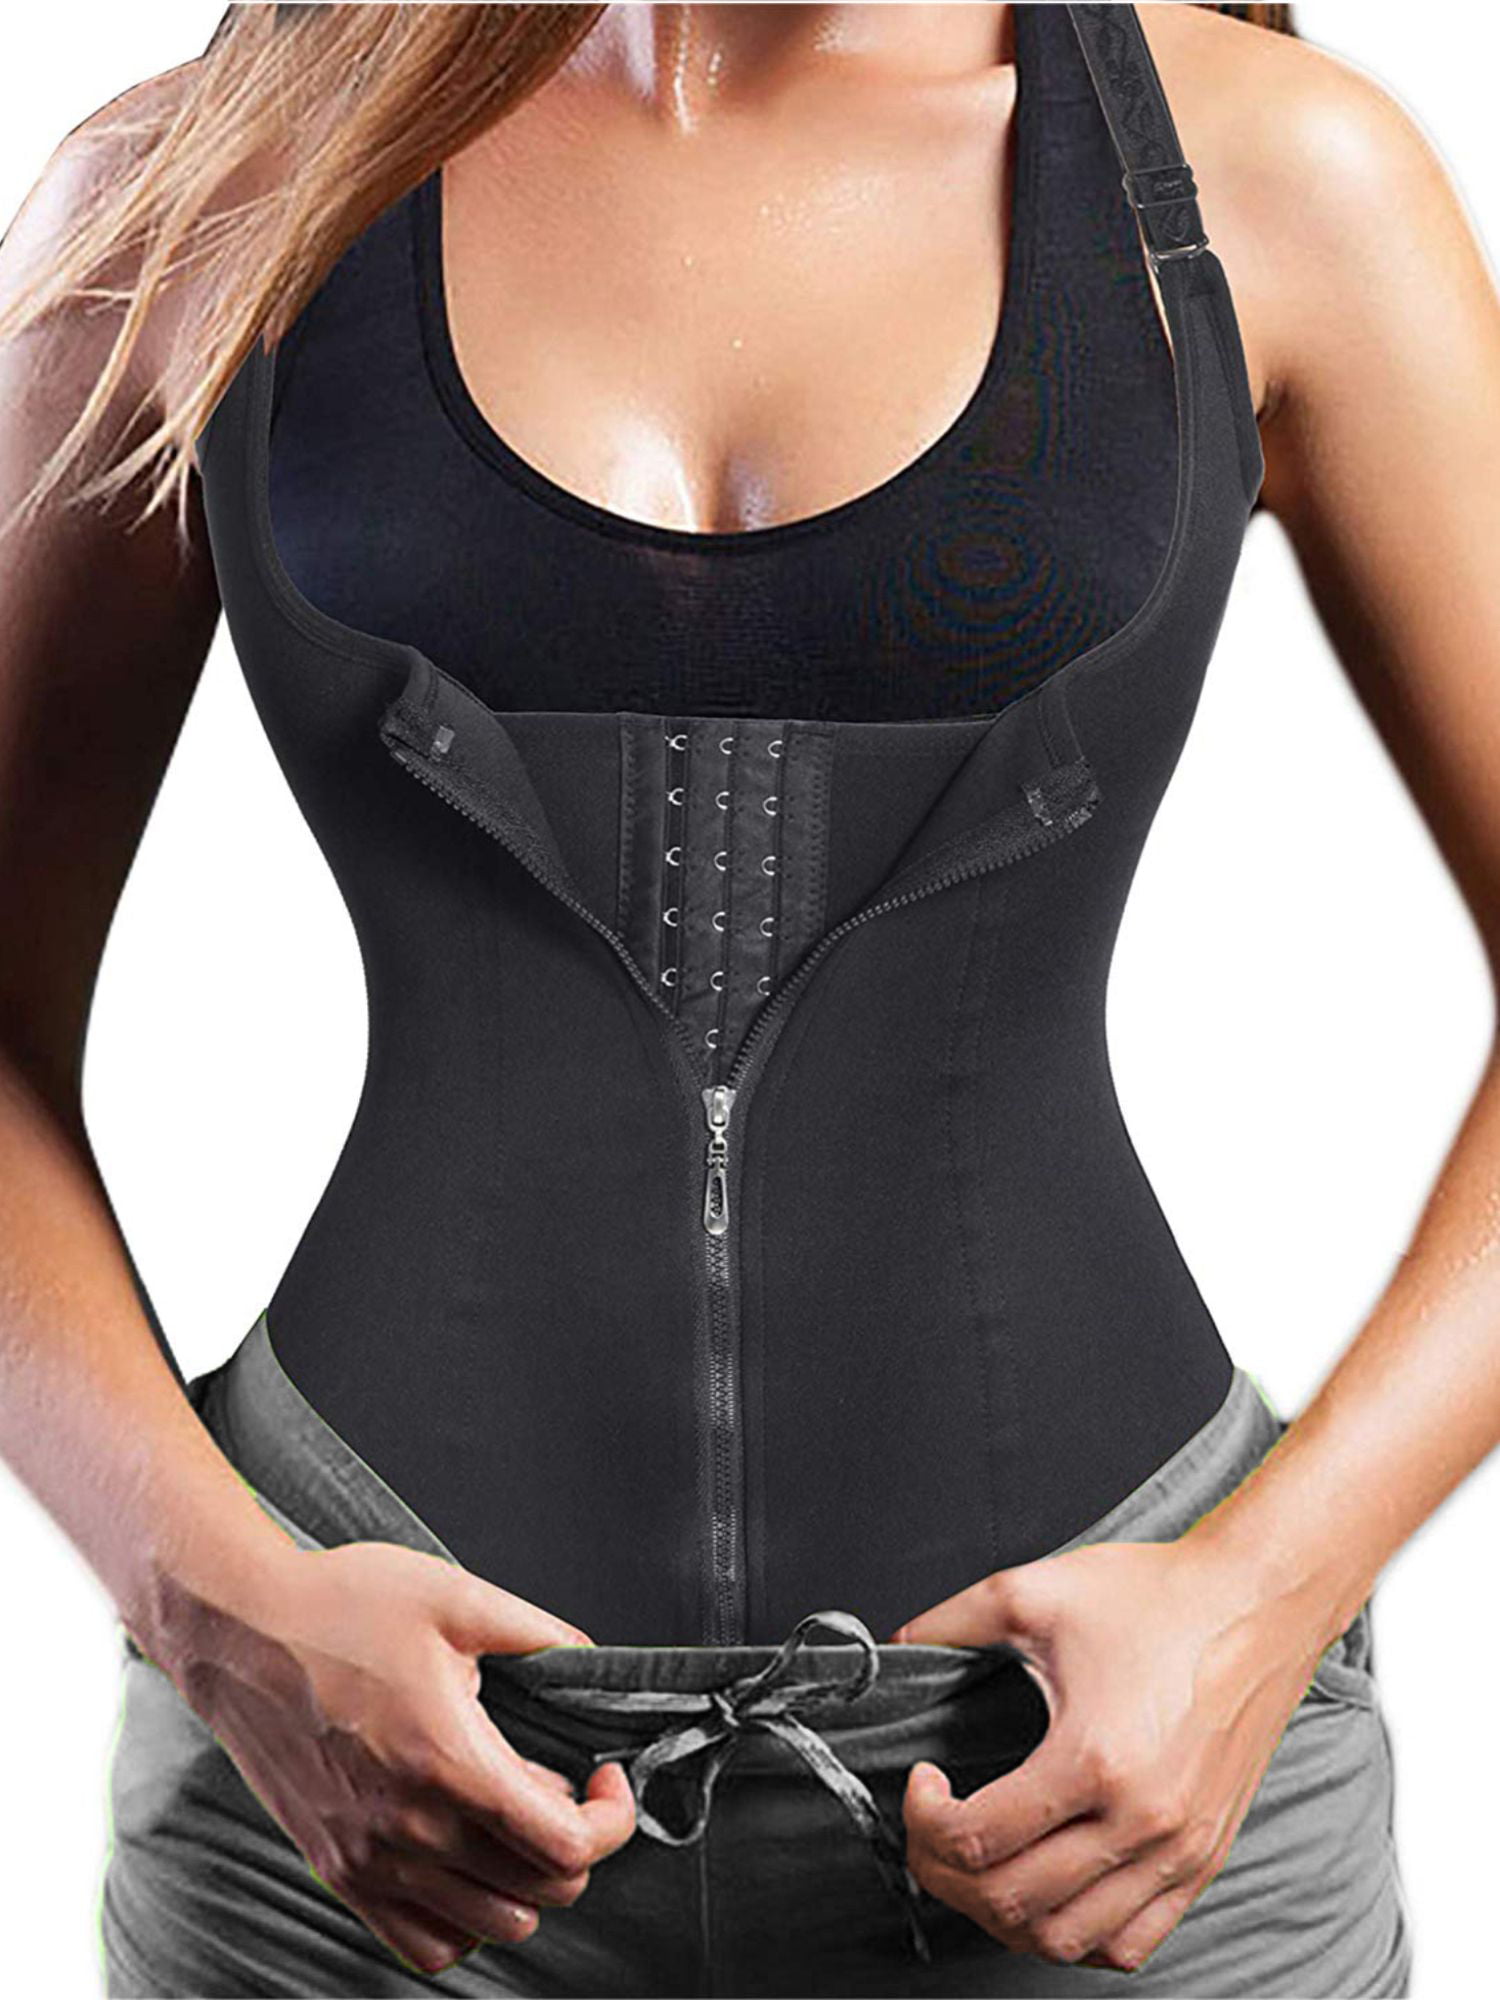 Actloe Womens Corset Waist Trainer for Weight Loss Slimming Body Shaper Sports